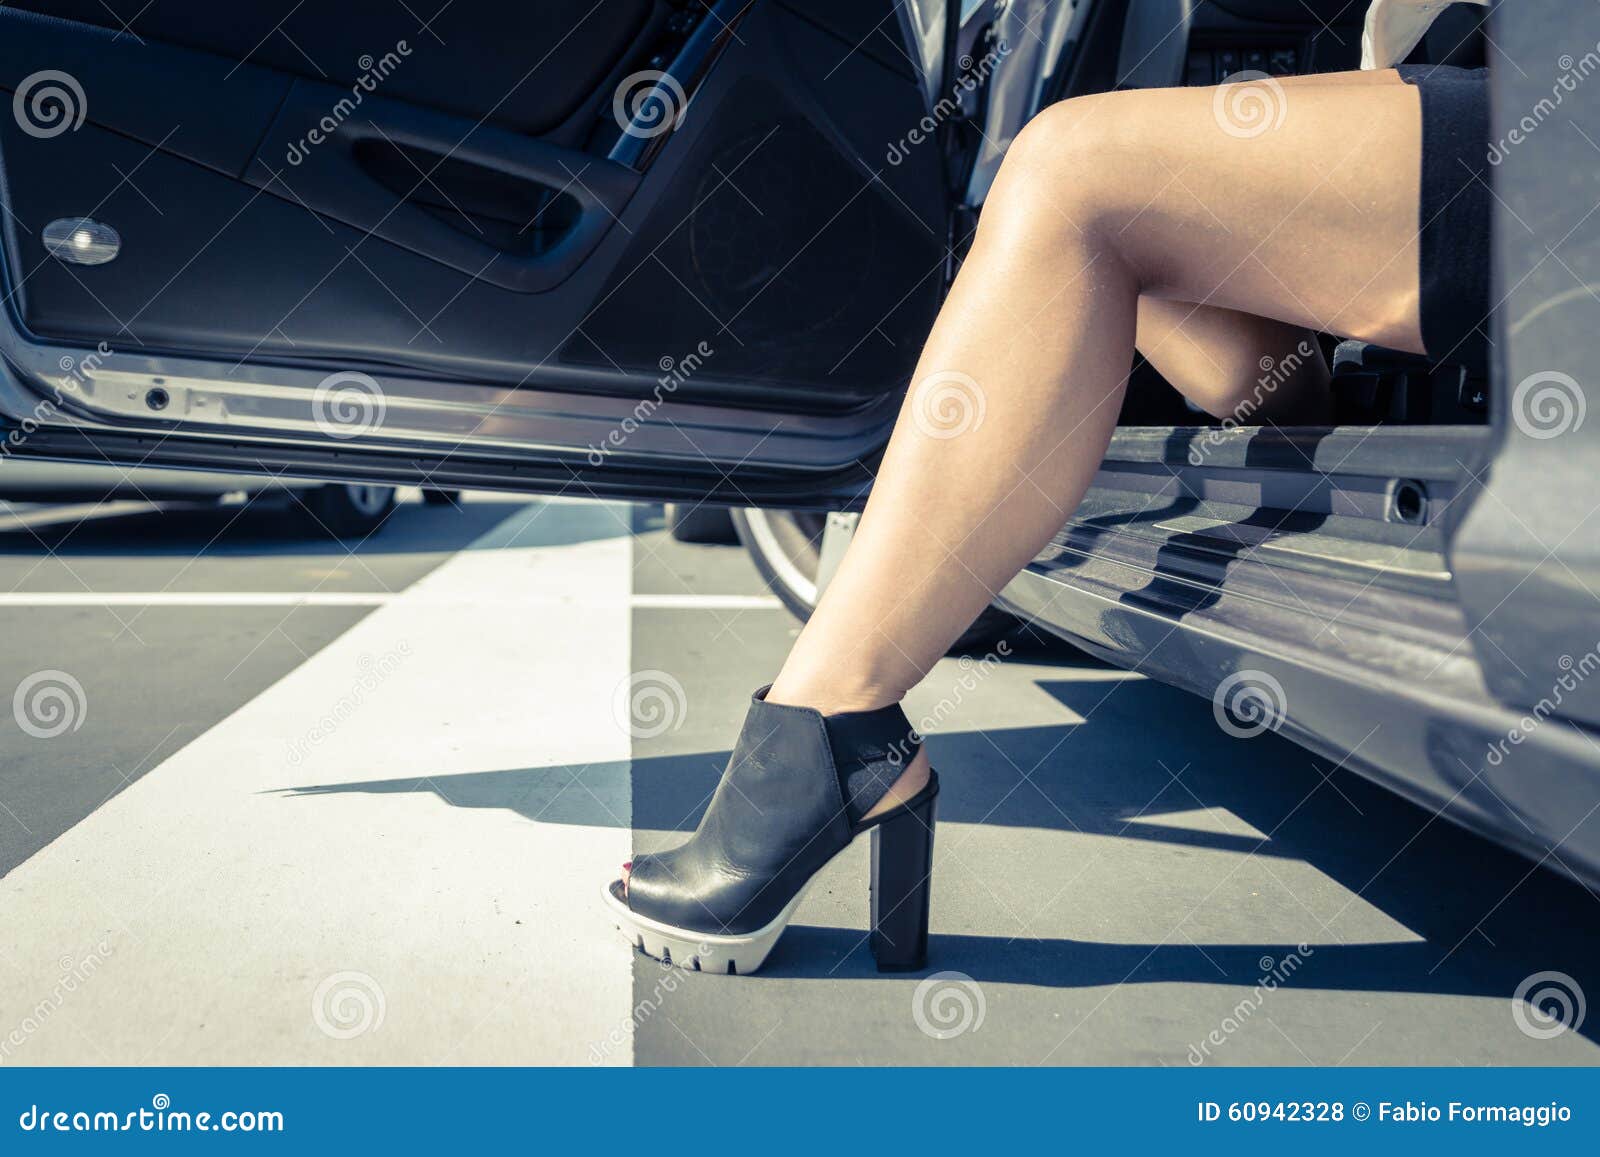 woman getting out the car.